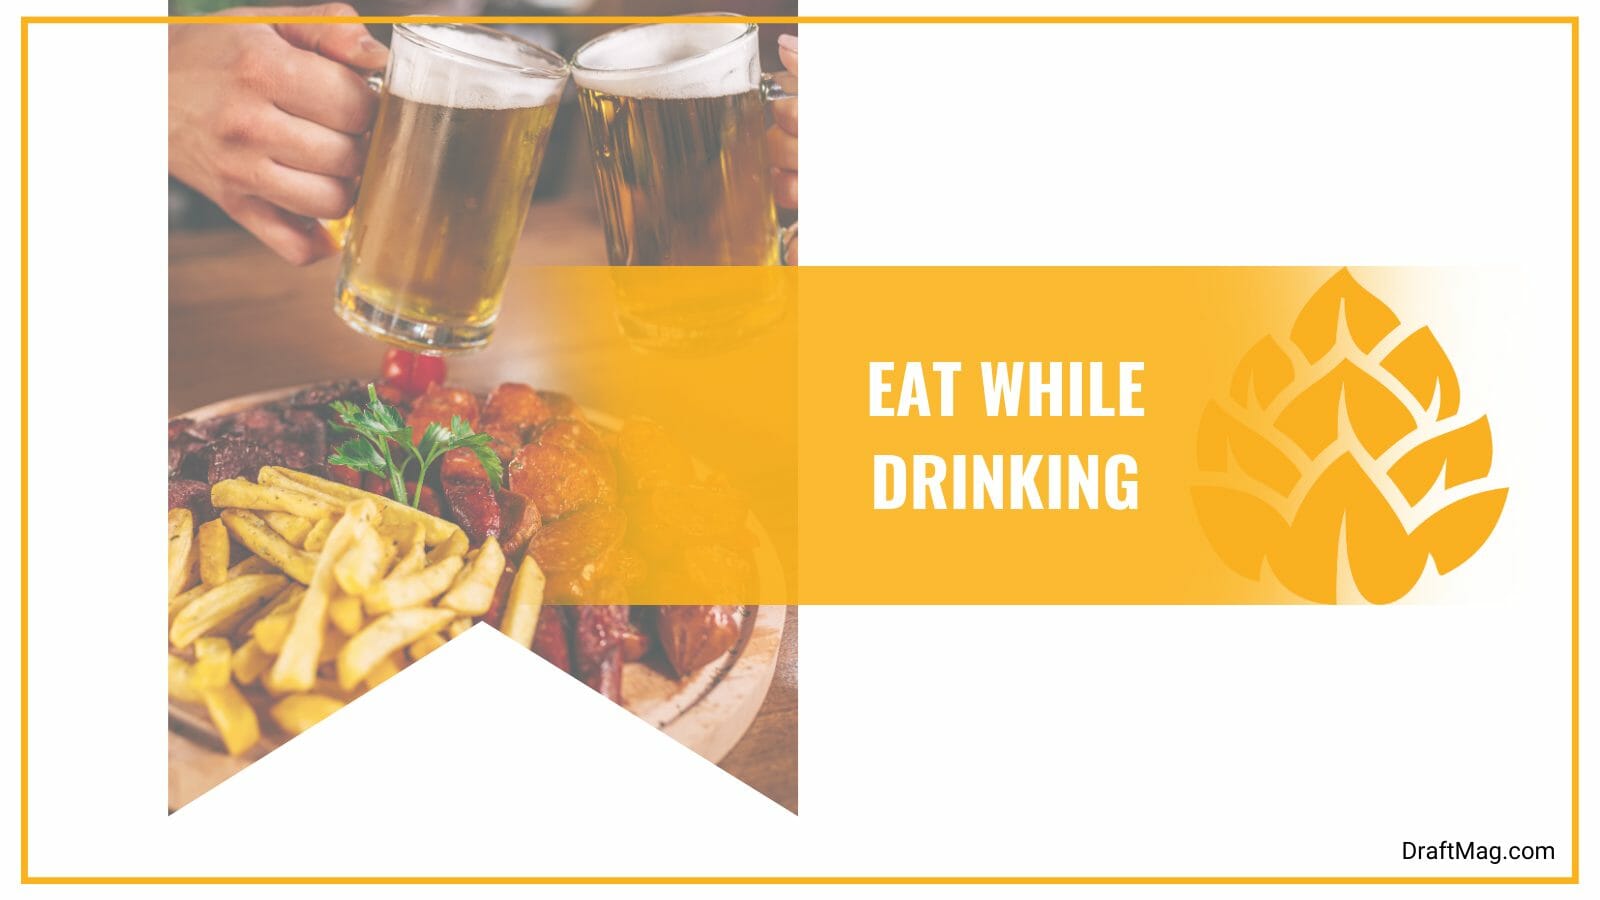 Eat while drinking beer